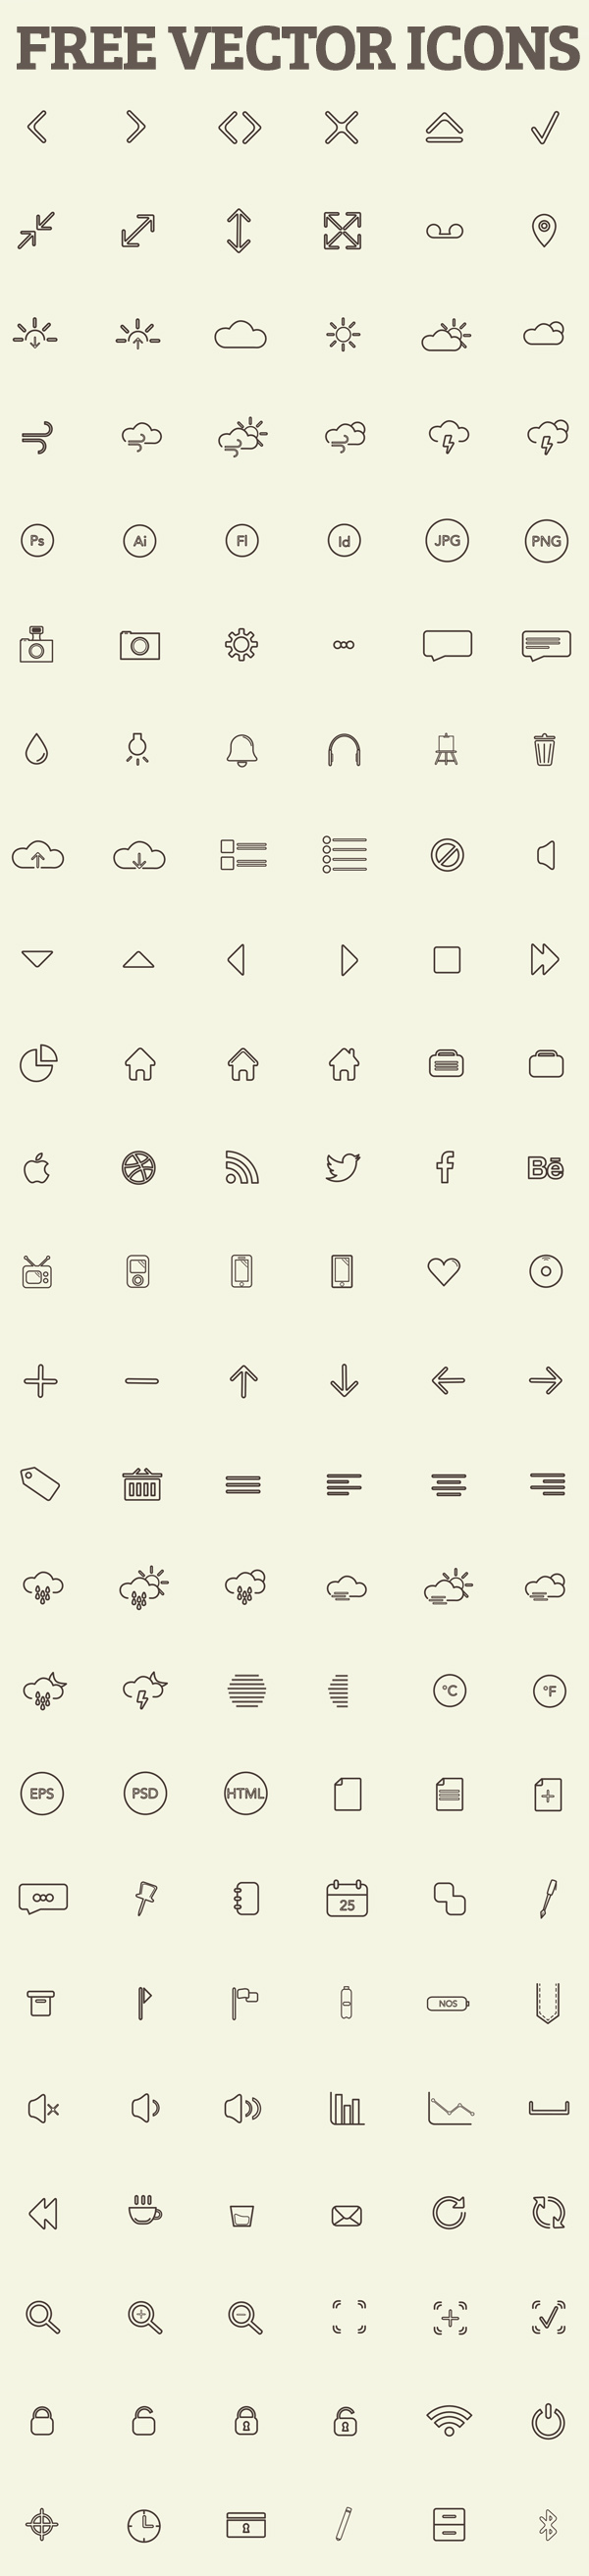 Free Beautiful  Vector Icons for UI Design